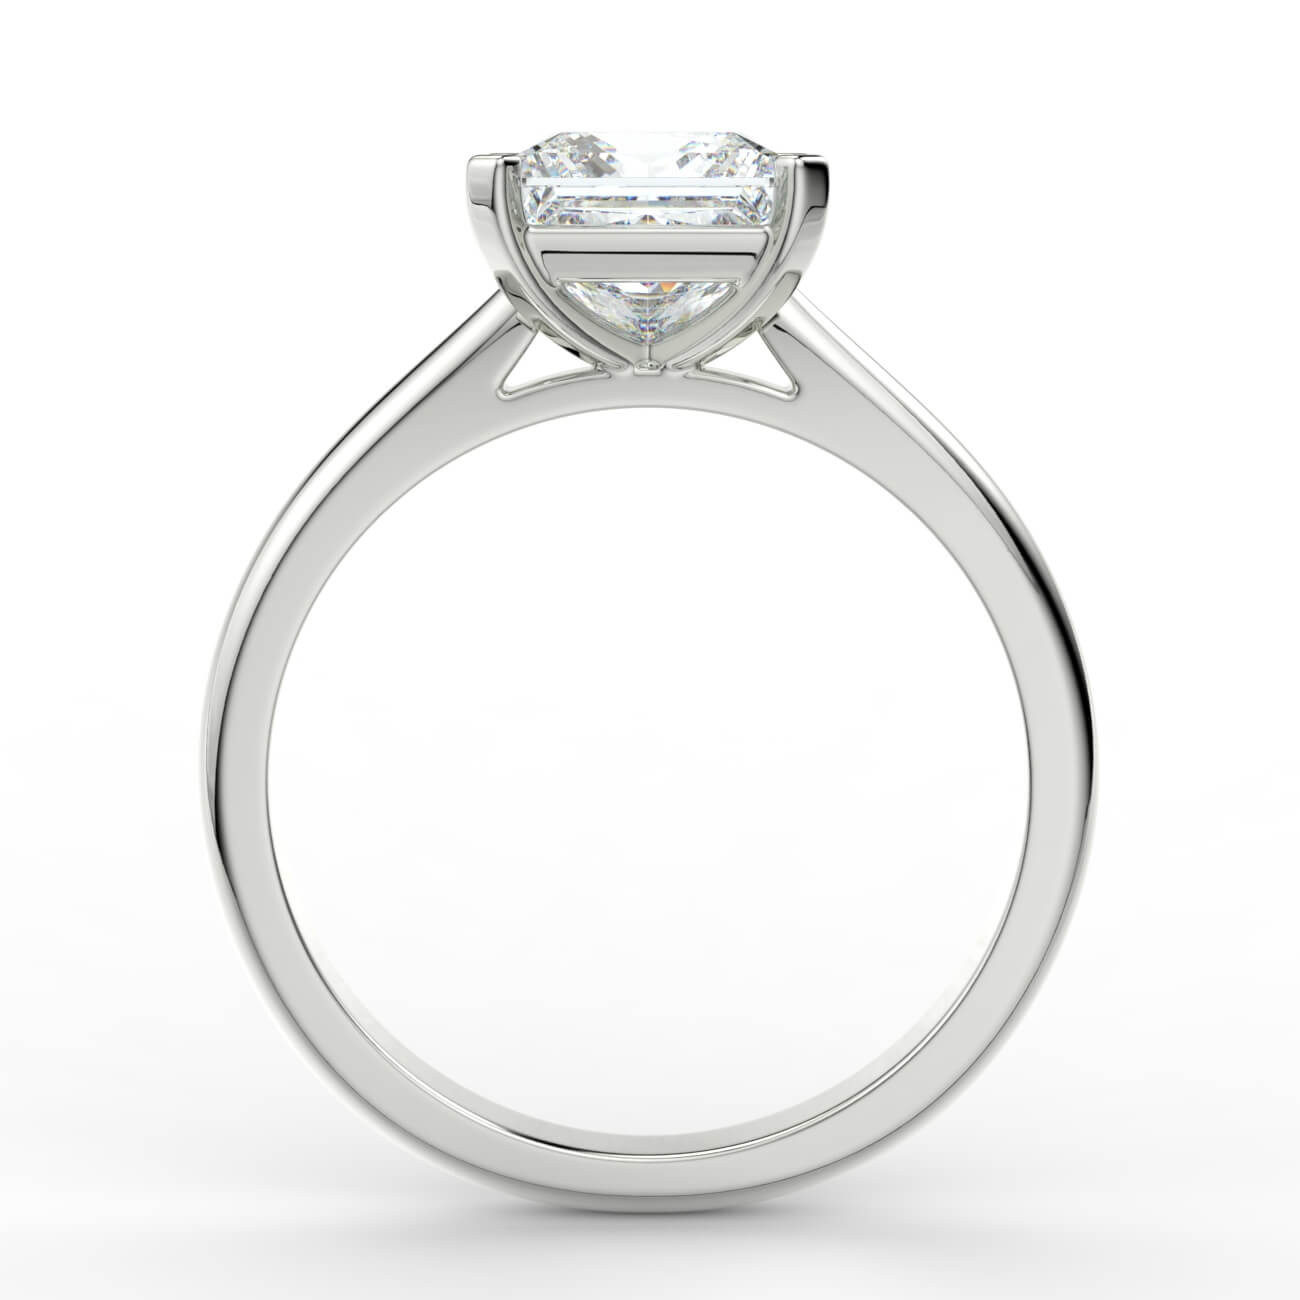 Princess cut diamond cathedral engagement ring in white gold – Australian Diamond Network